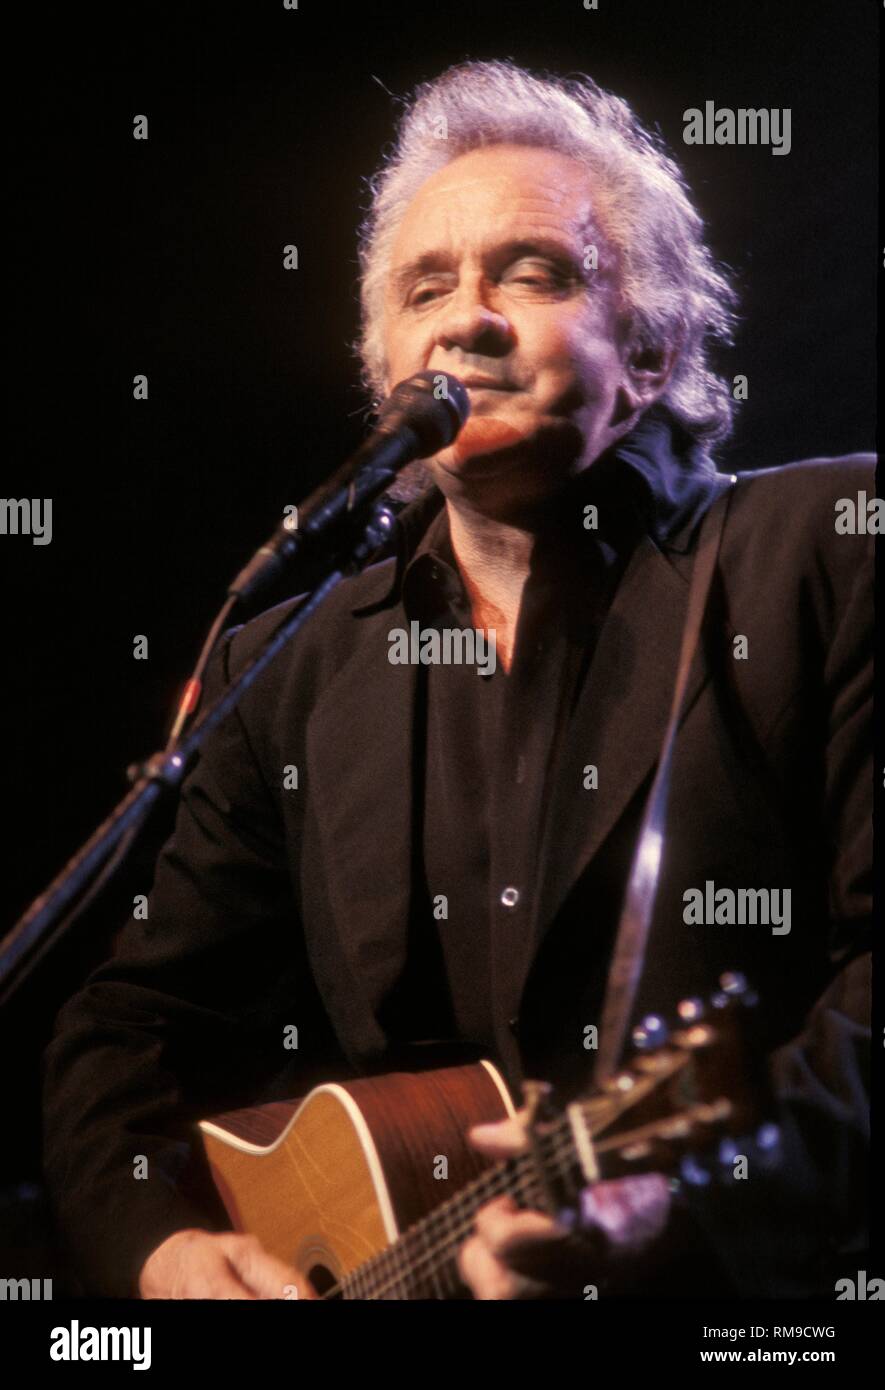 Grammy Award winning singer and songwriter Johnny Cash is shown performing on stage with the country super group the Highwaymen. Stock Photo